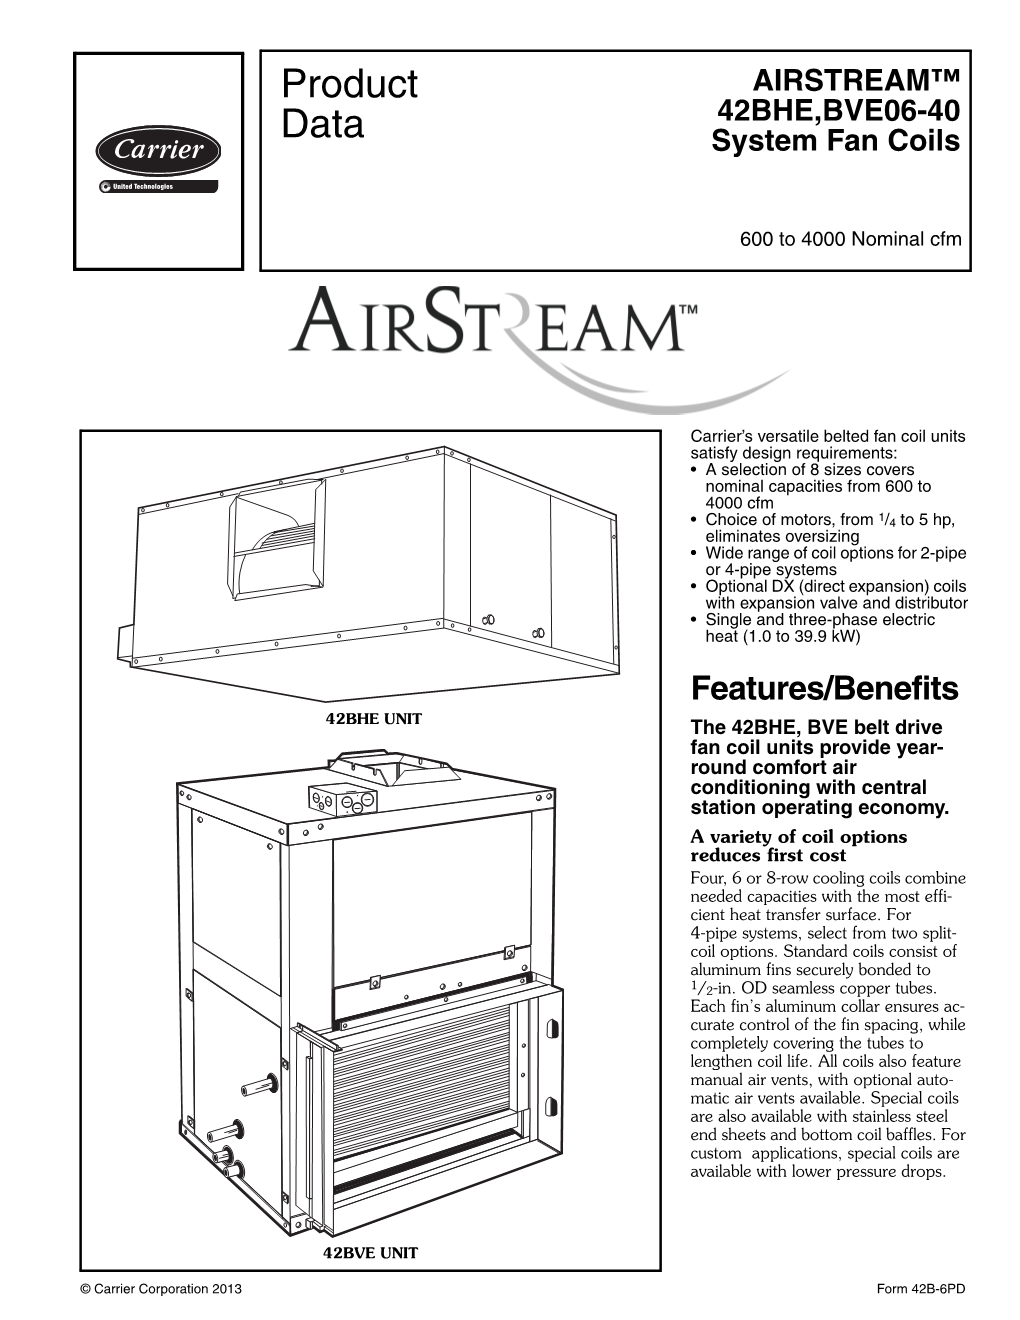 AIRSTREAM™ 42BHE,BVE06-40 System Fan Coils